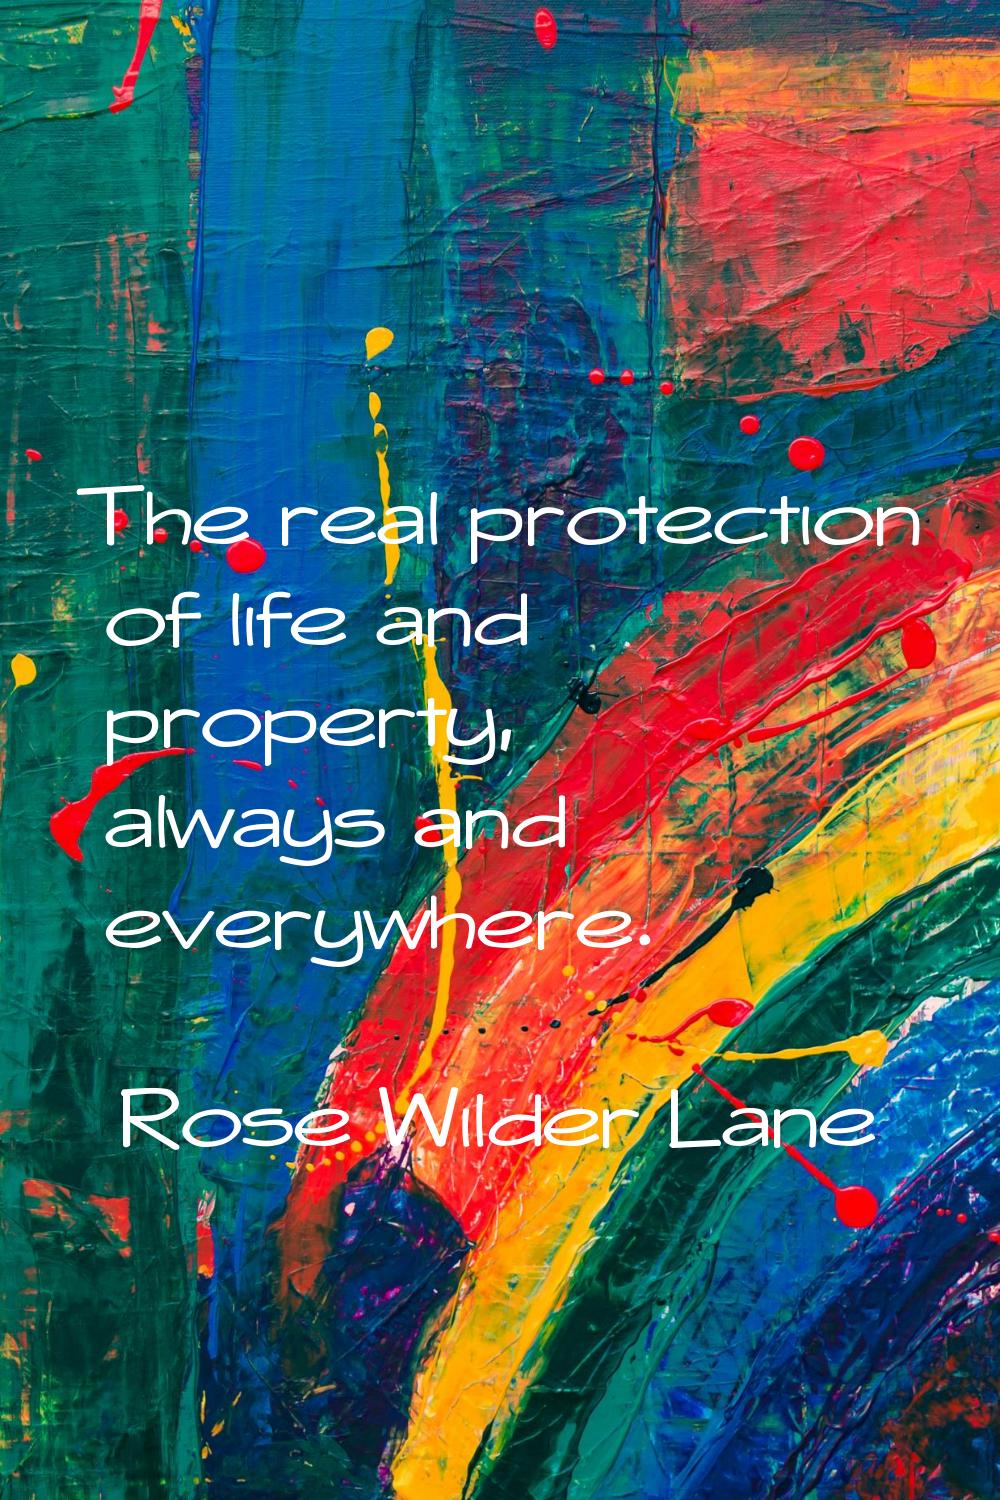 The real protection of life and property, always and everywhere.